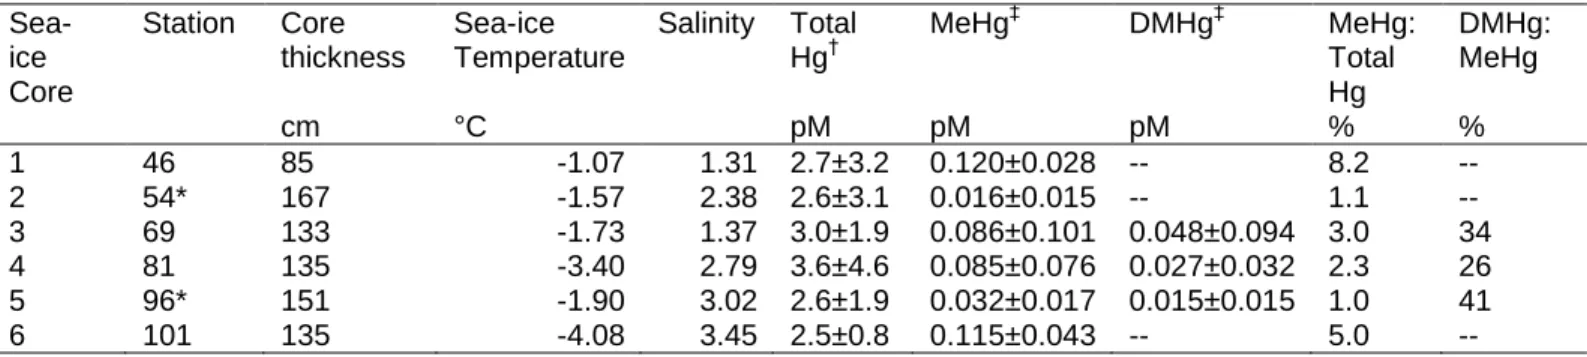 Table 1: Summary of sea-ice core characteristics and mean speciated mercury (Hg)  377 